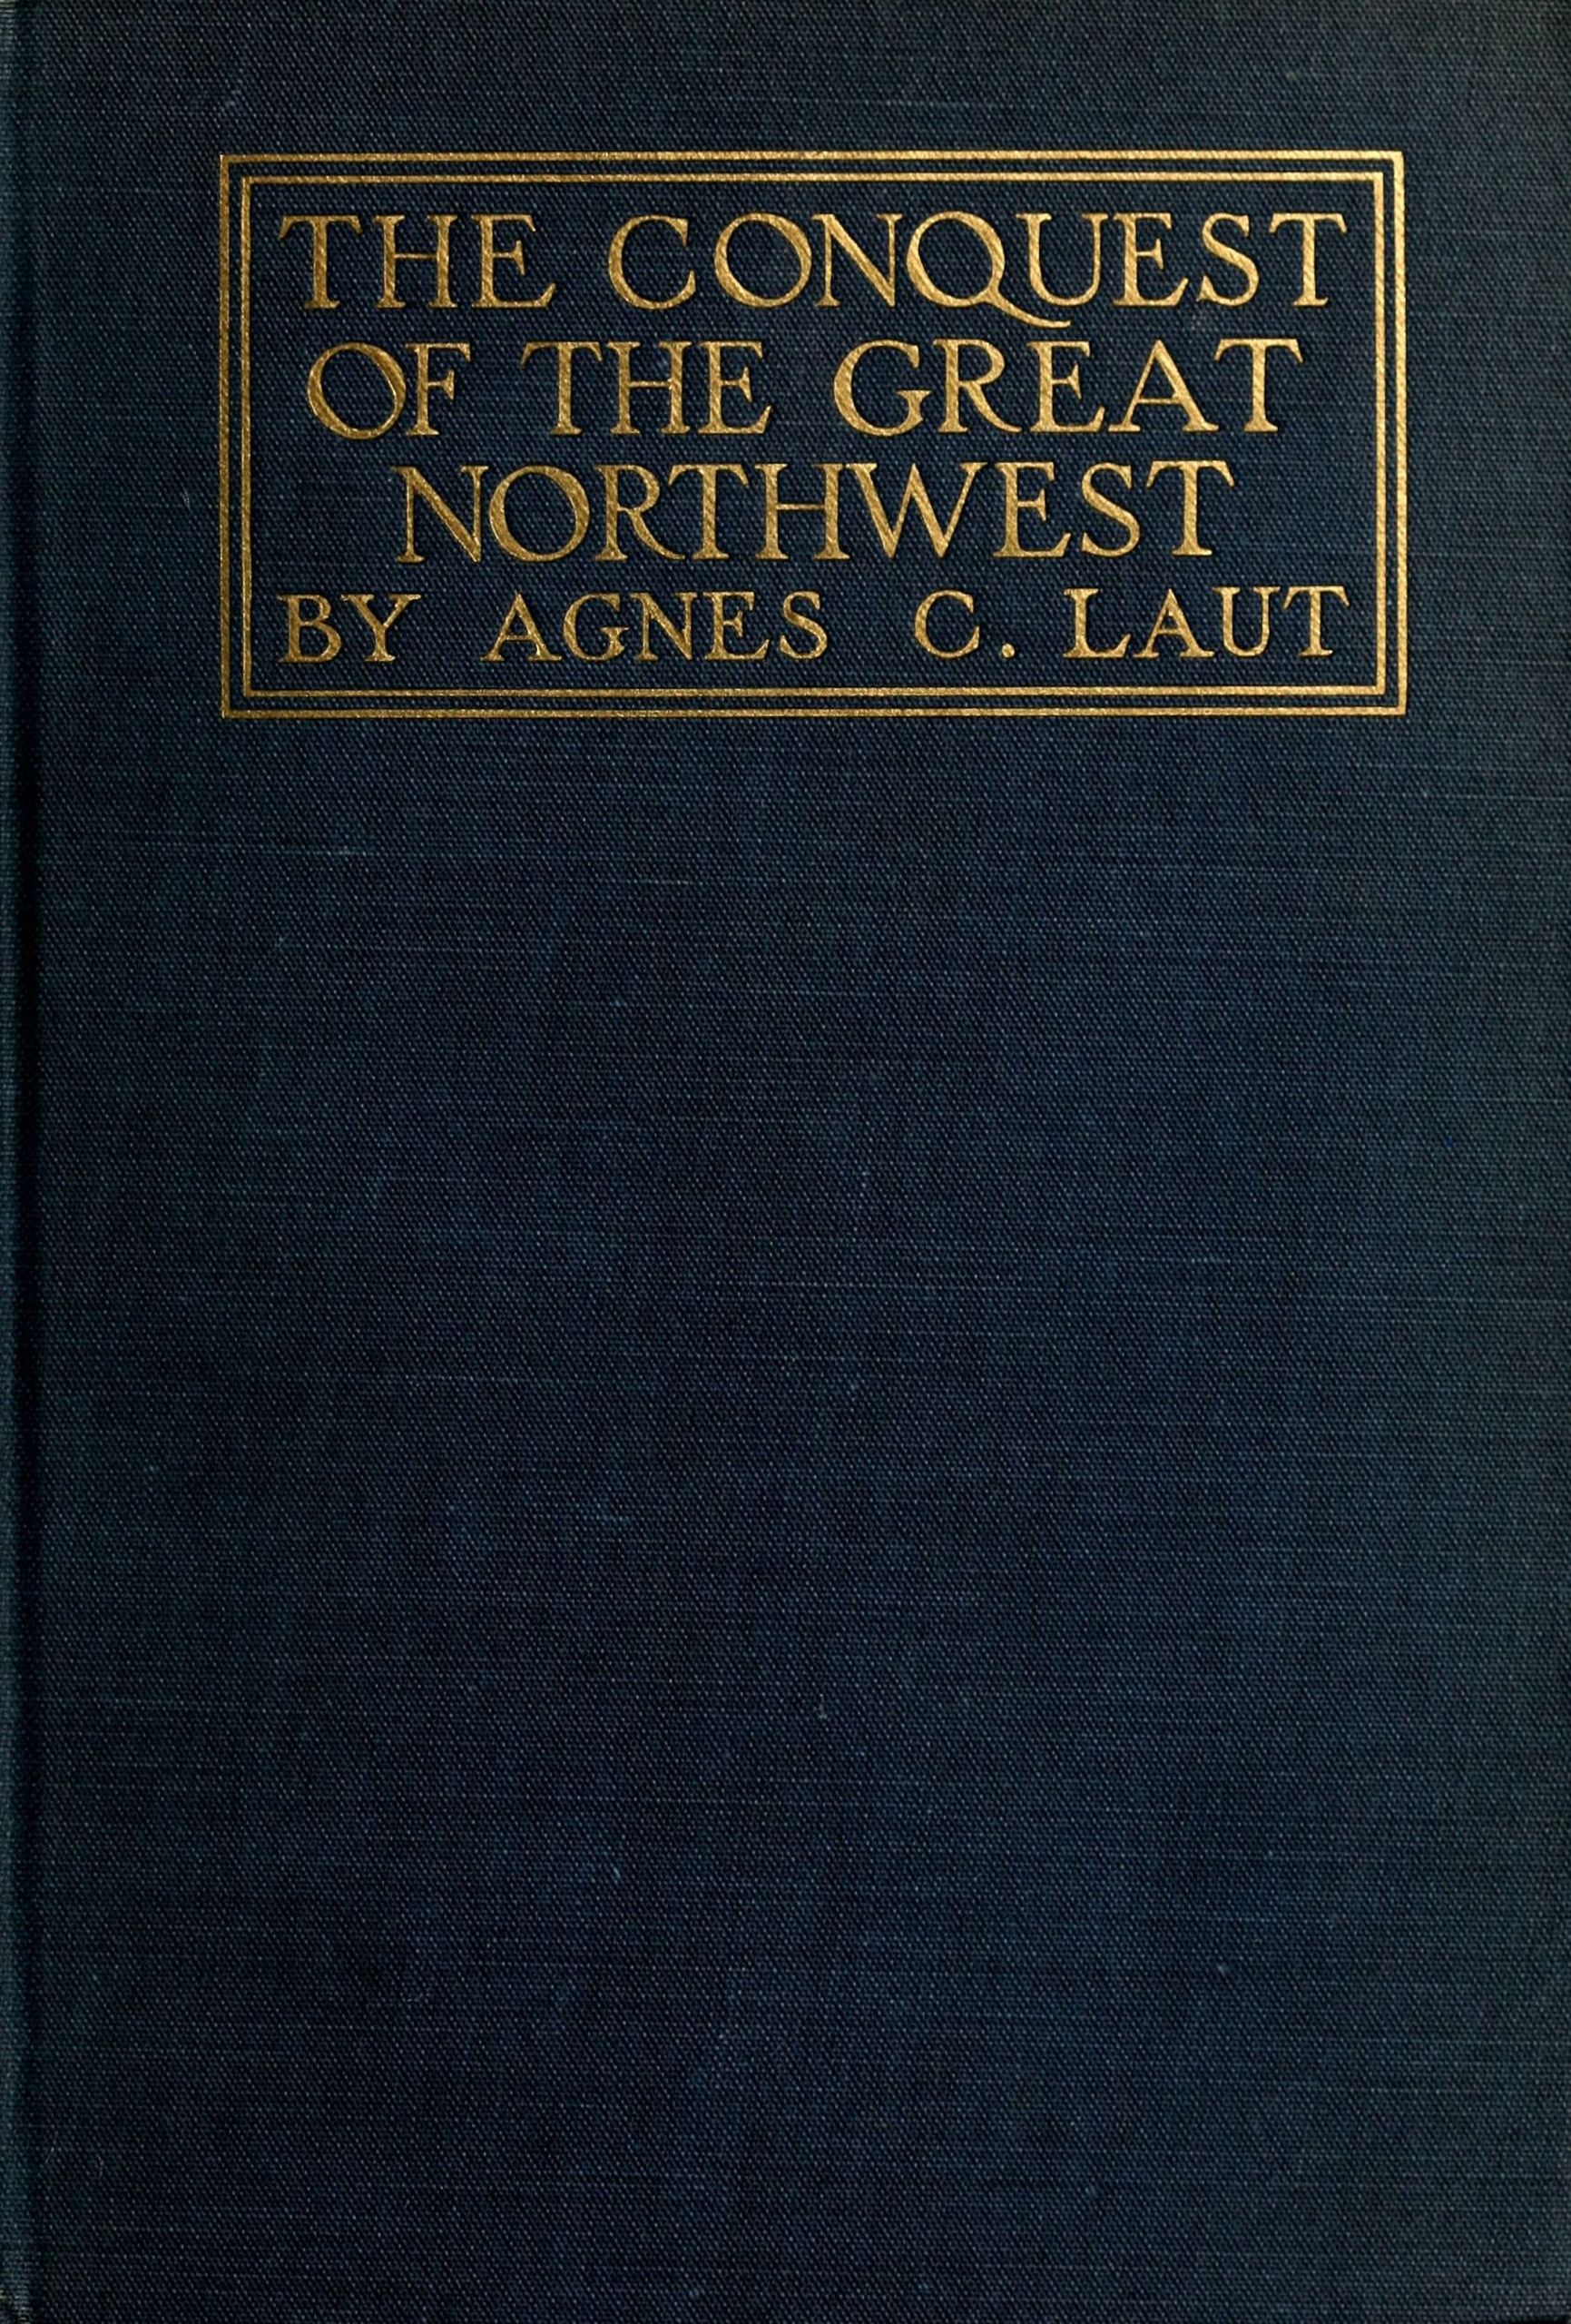 The Conquest of the Great Northwest, Volume II, by Agnes C